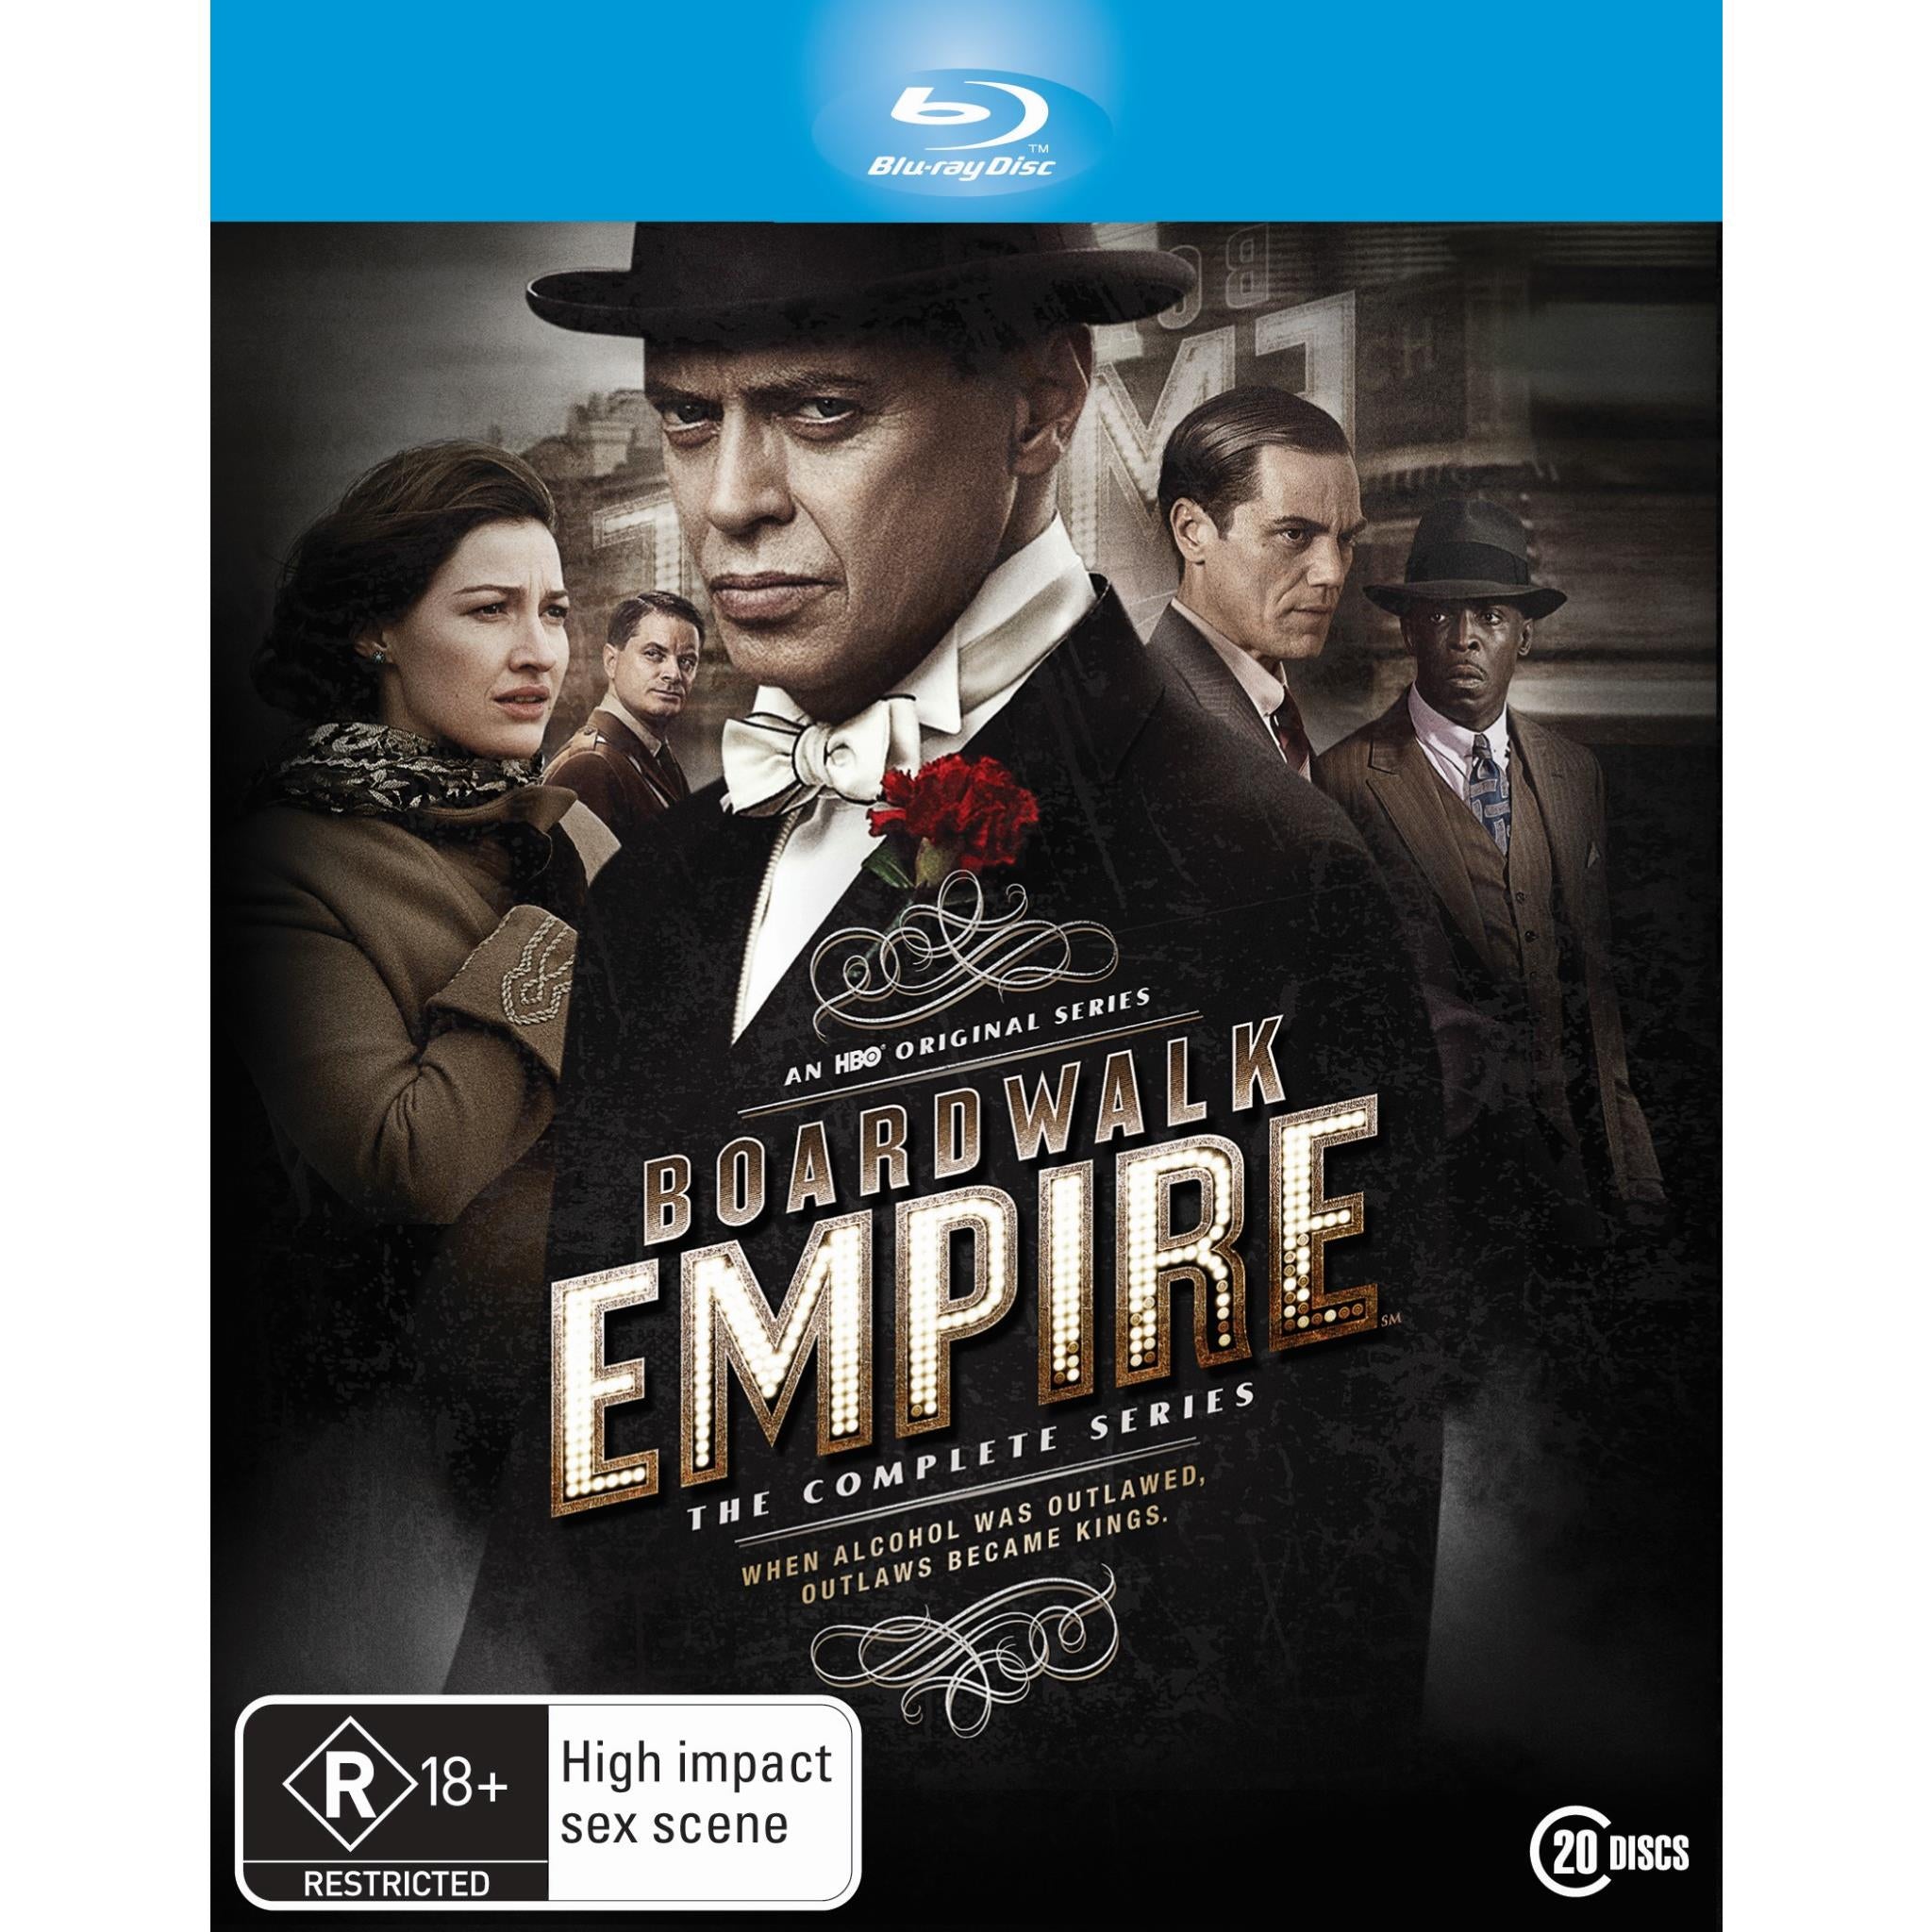 april galloway recommends boardwalk empire full episodes free pic